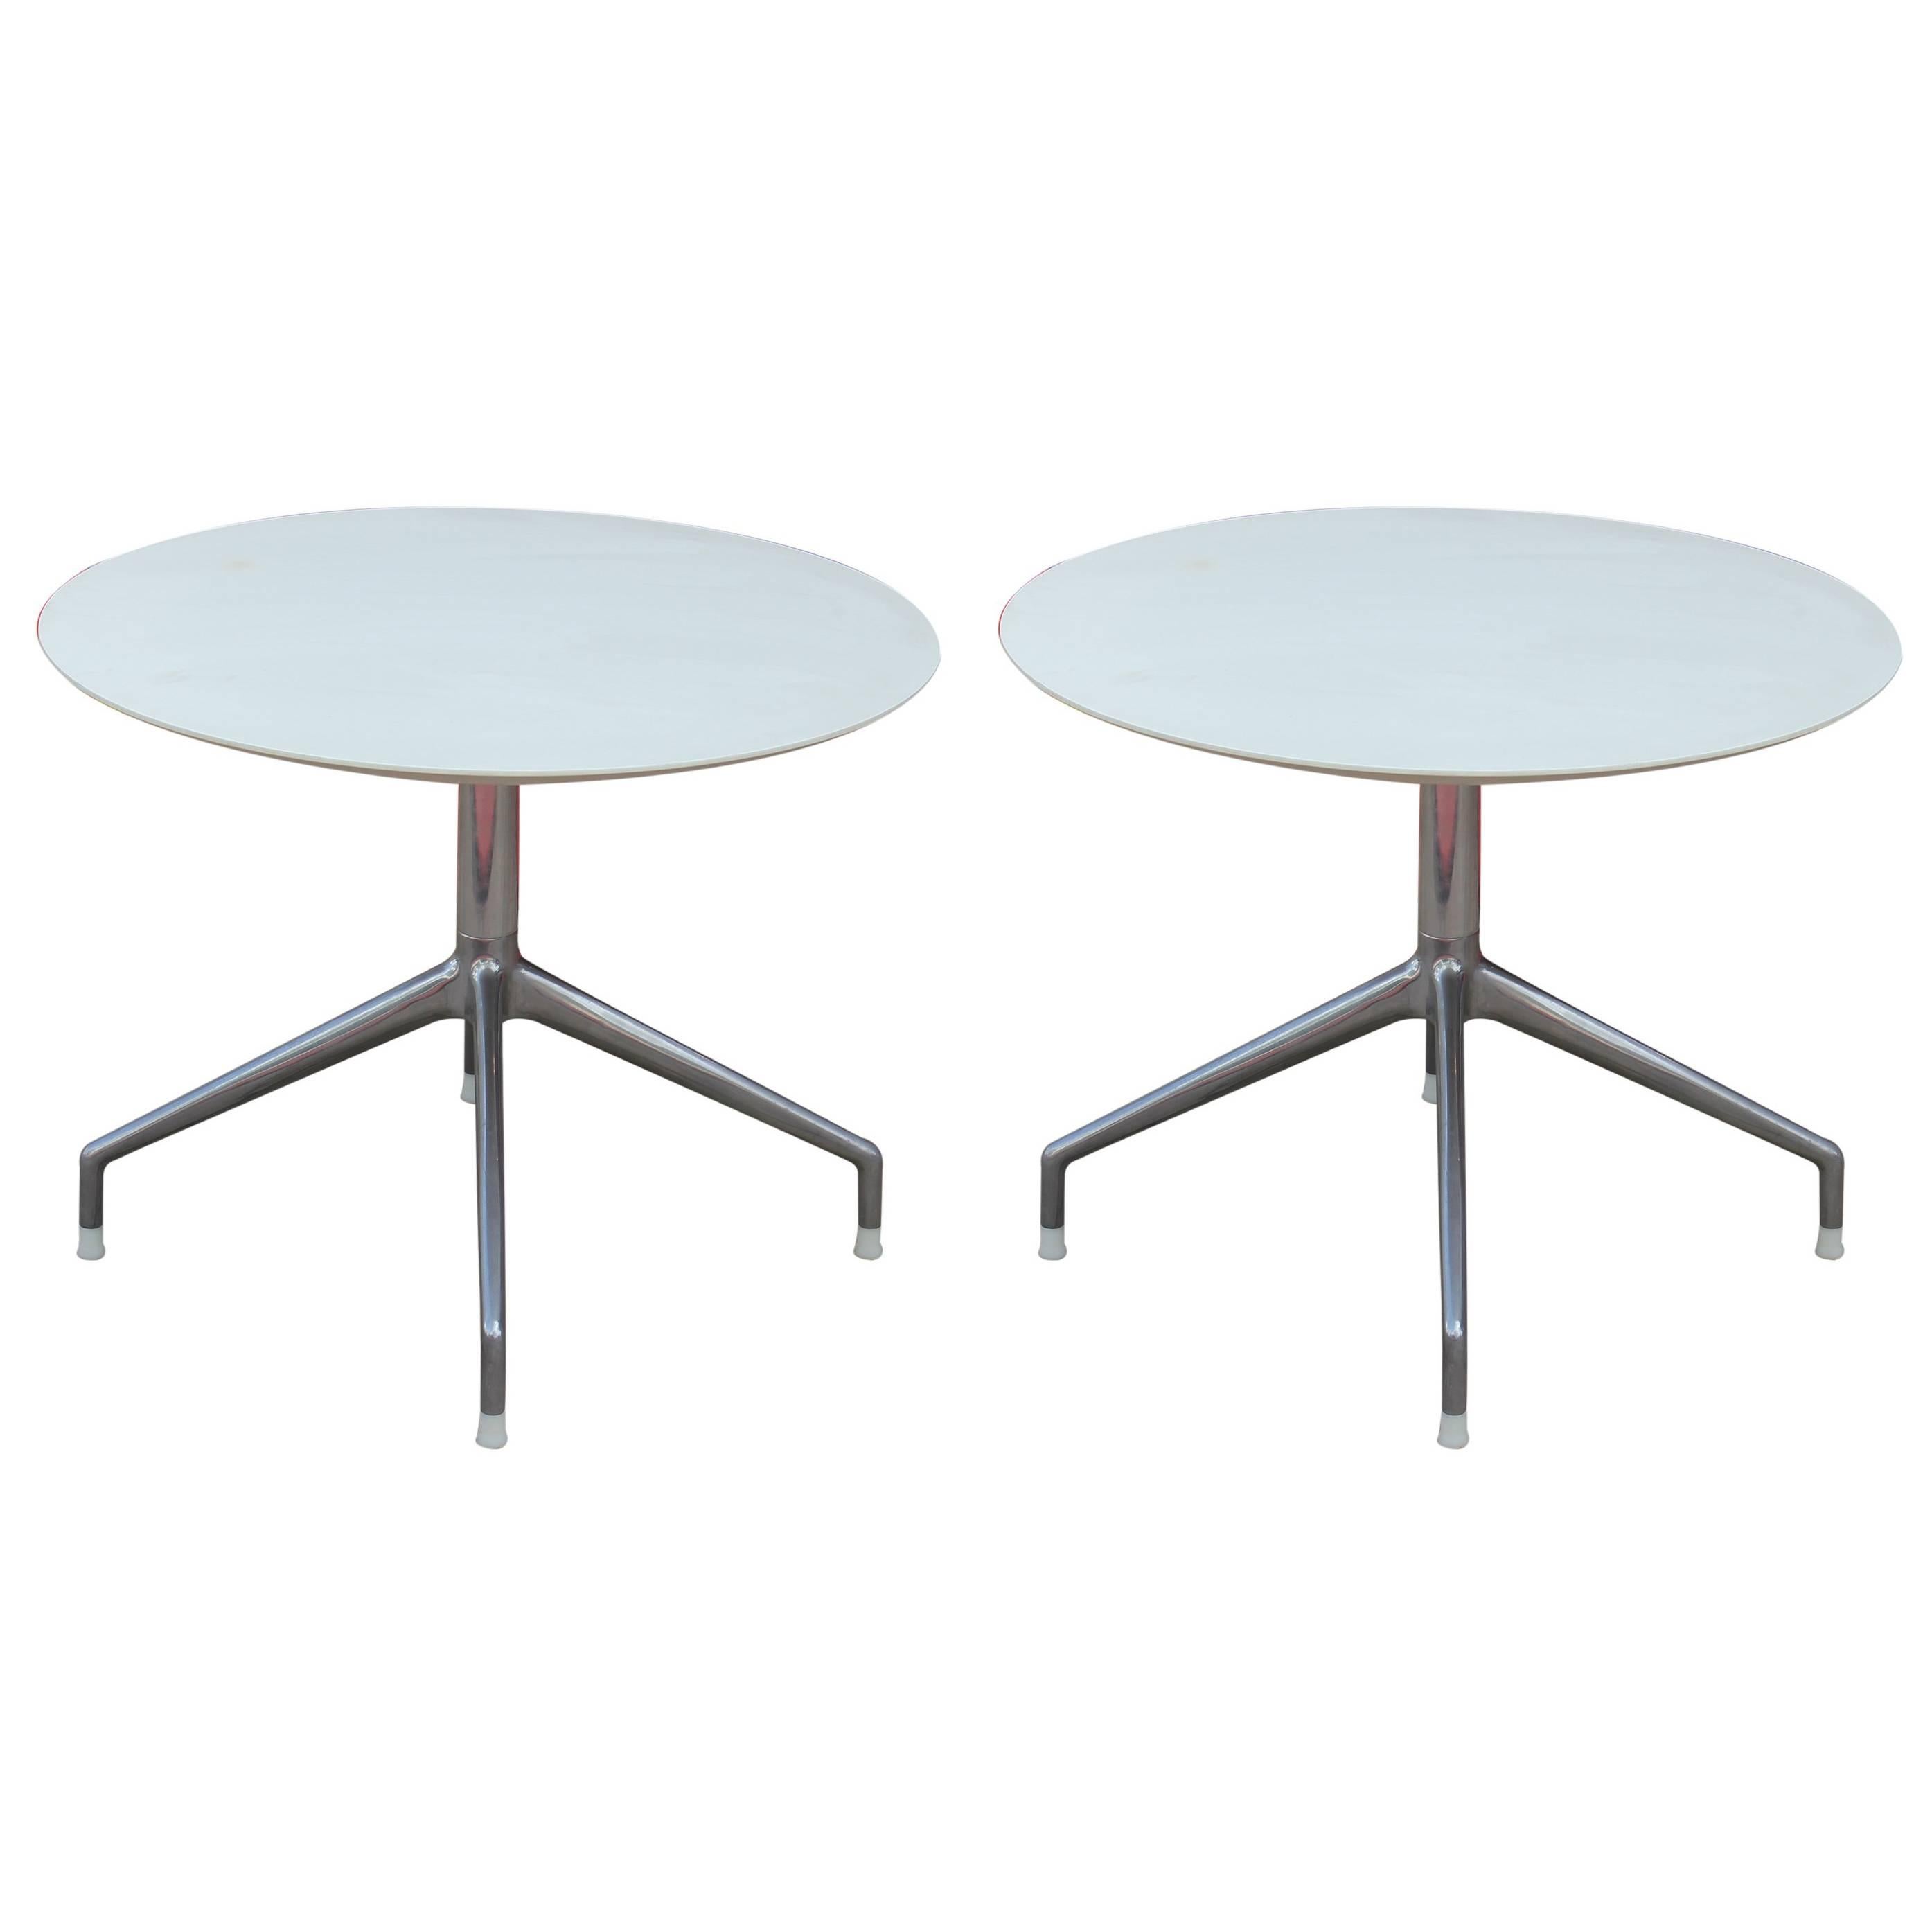 Pair of Round White Sina Tables by Uwe Fischer for B&B Italia